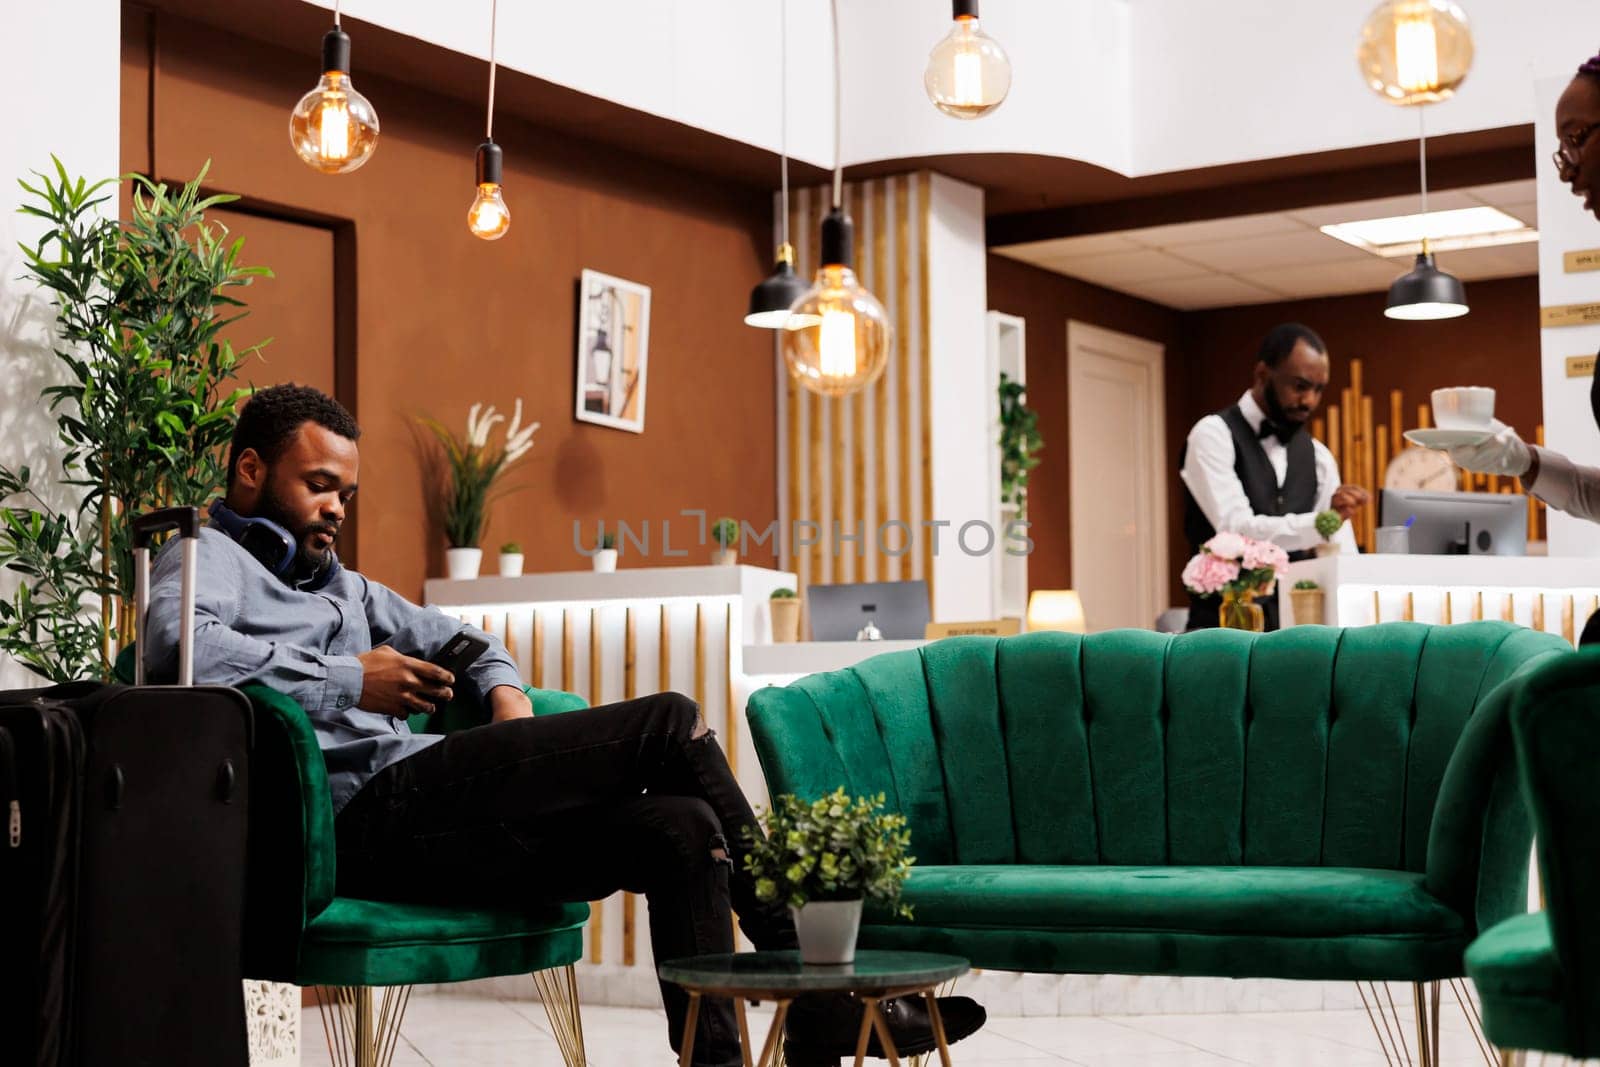 Black guy traveler sitting in hotel lobby with smartphone making mobile check-in. Young African American man tourist with luggage using phone texting sms message, waiting for room